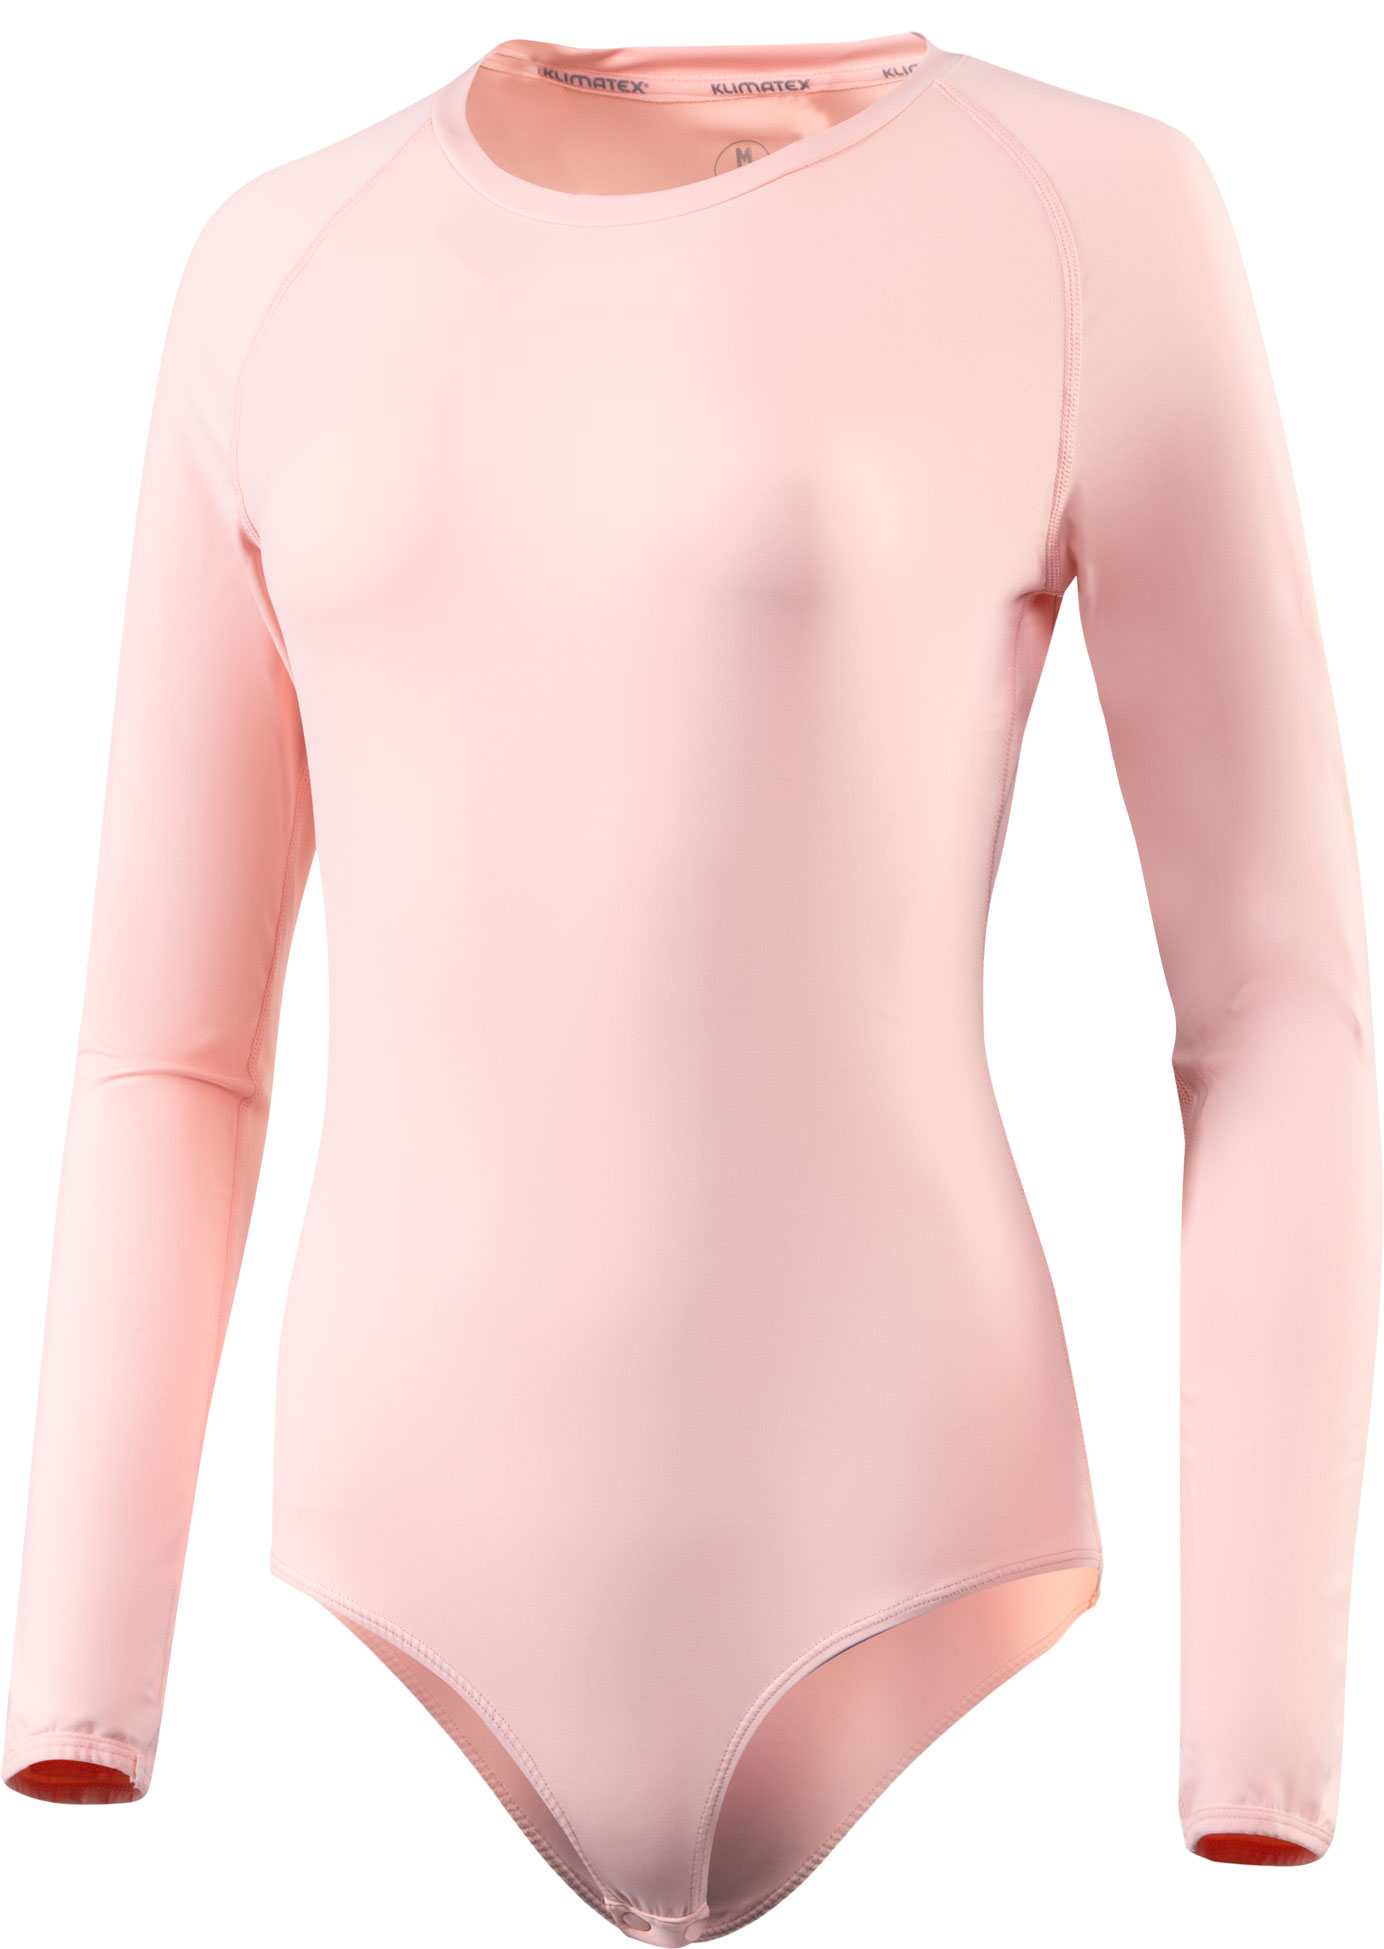 Women’s bodysuit with long sleeves